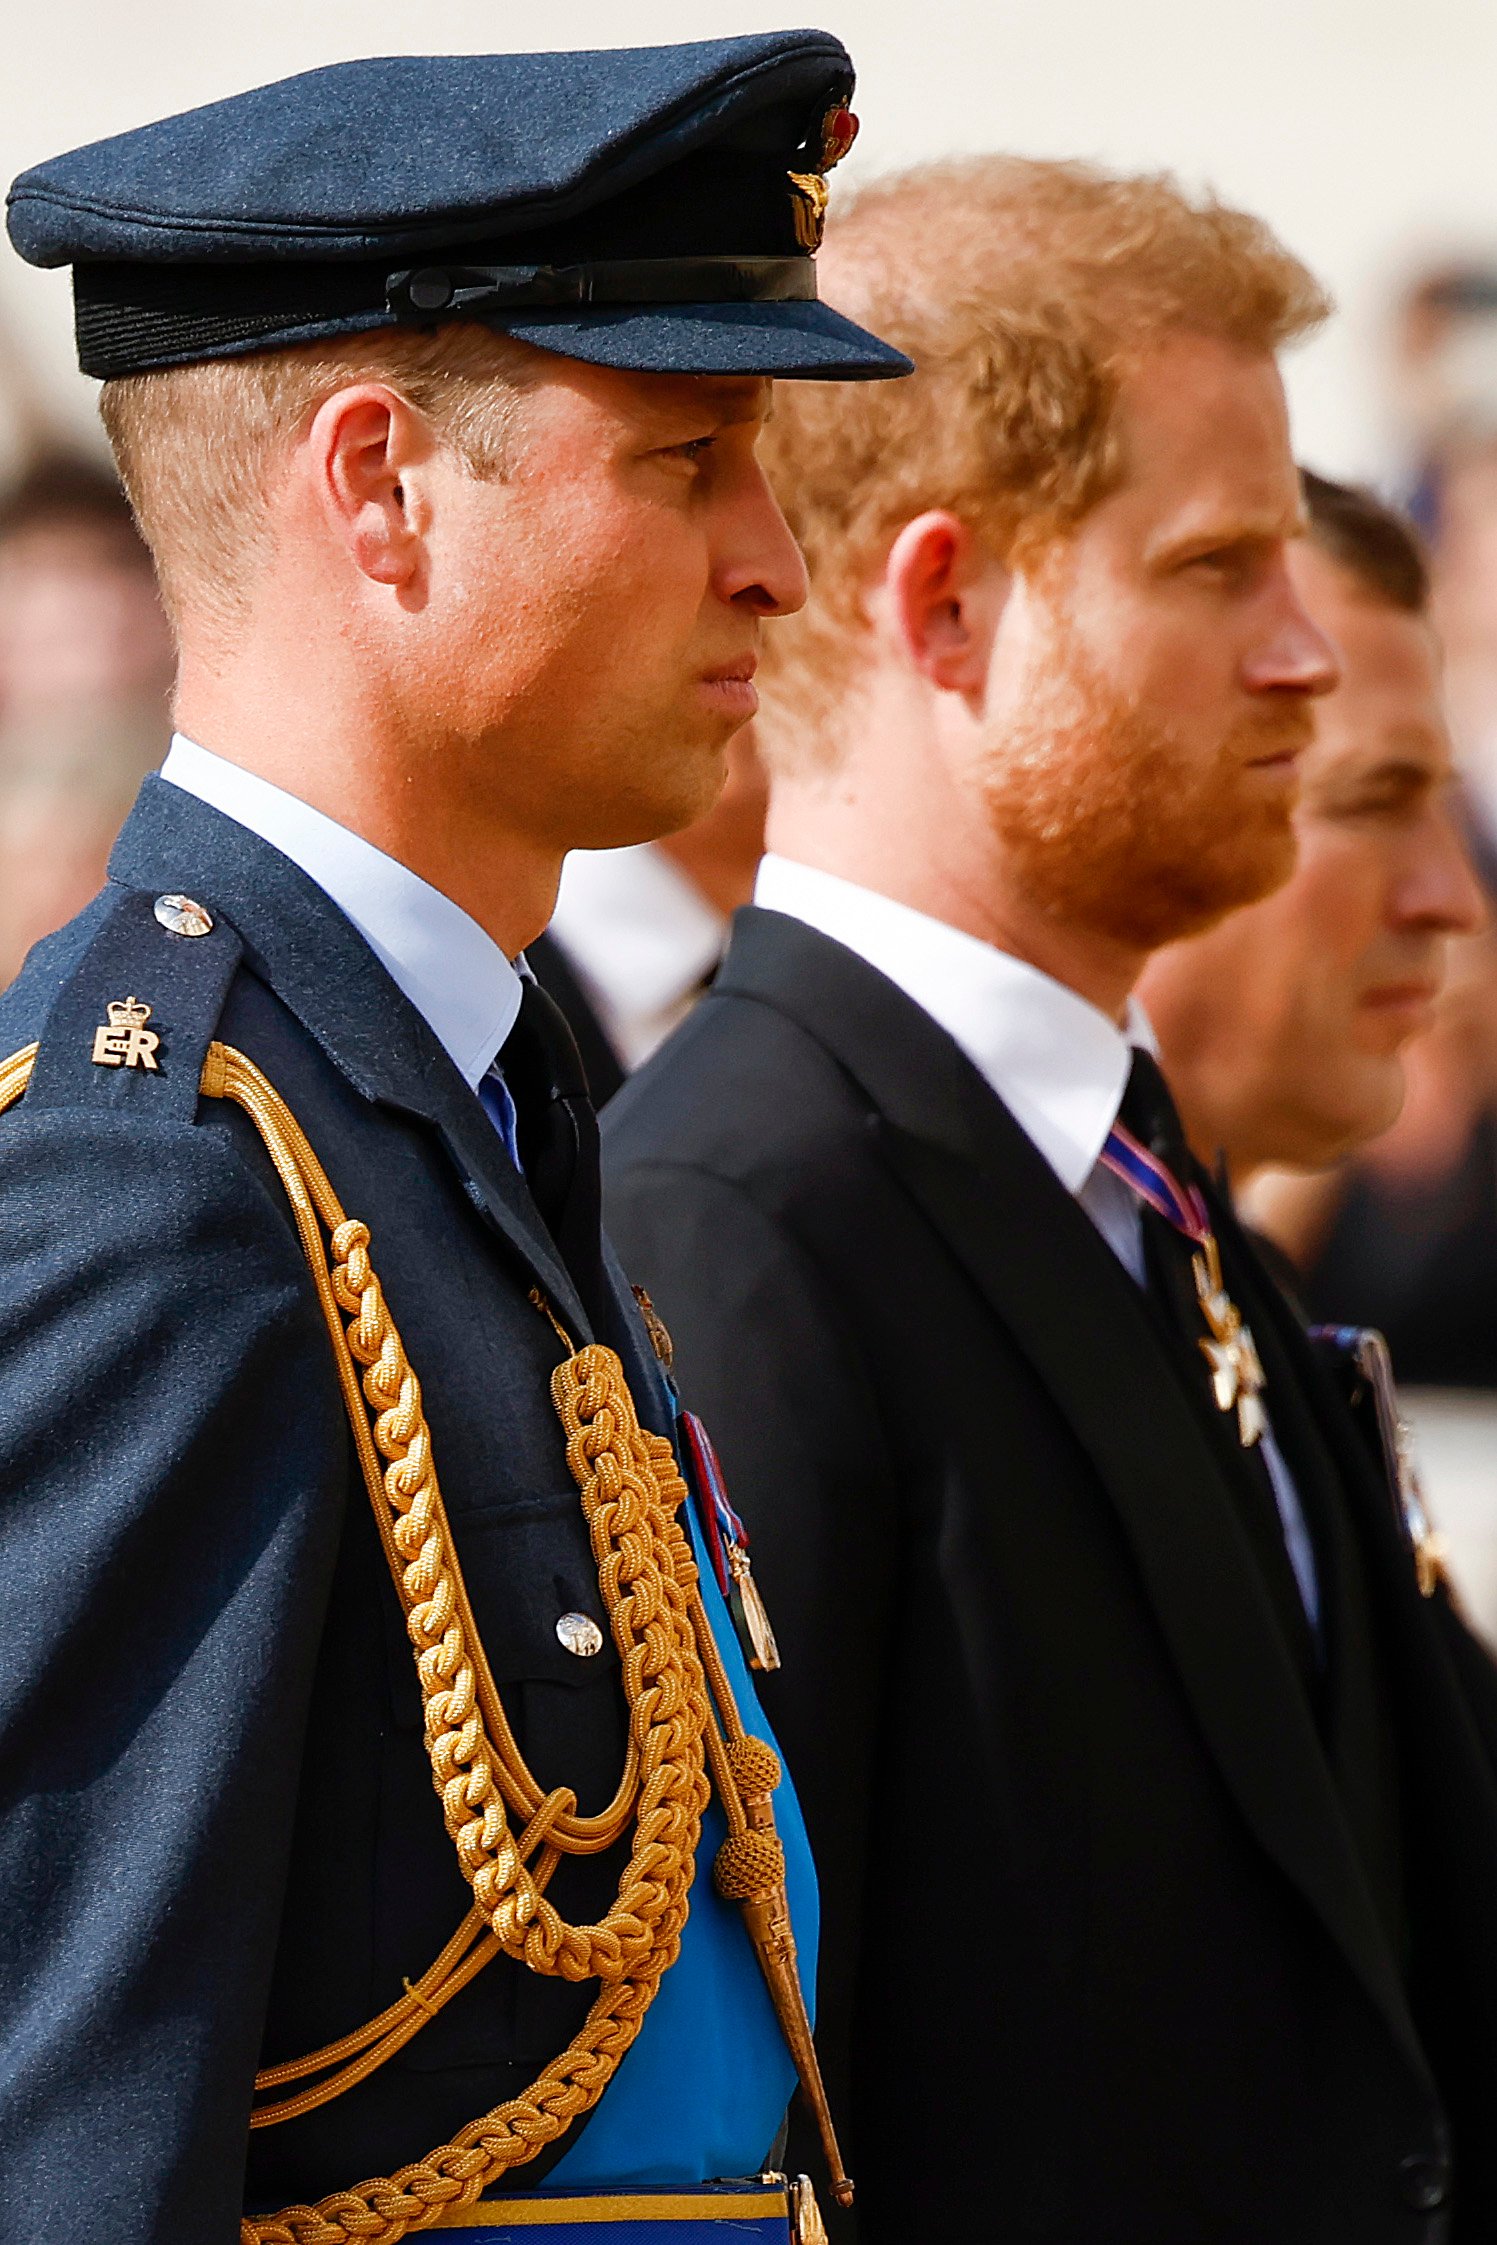 Prince William and Prine Harry walk behind the coffin during the procession for the Lying-in State of Queen Elizabeth II